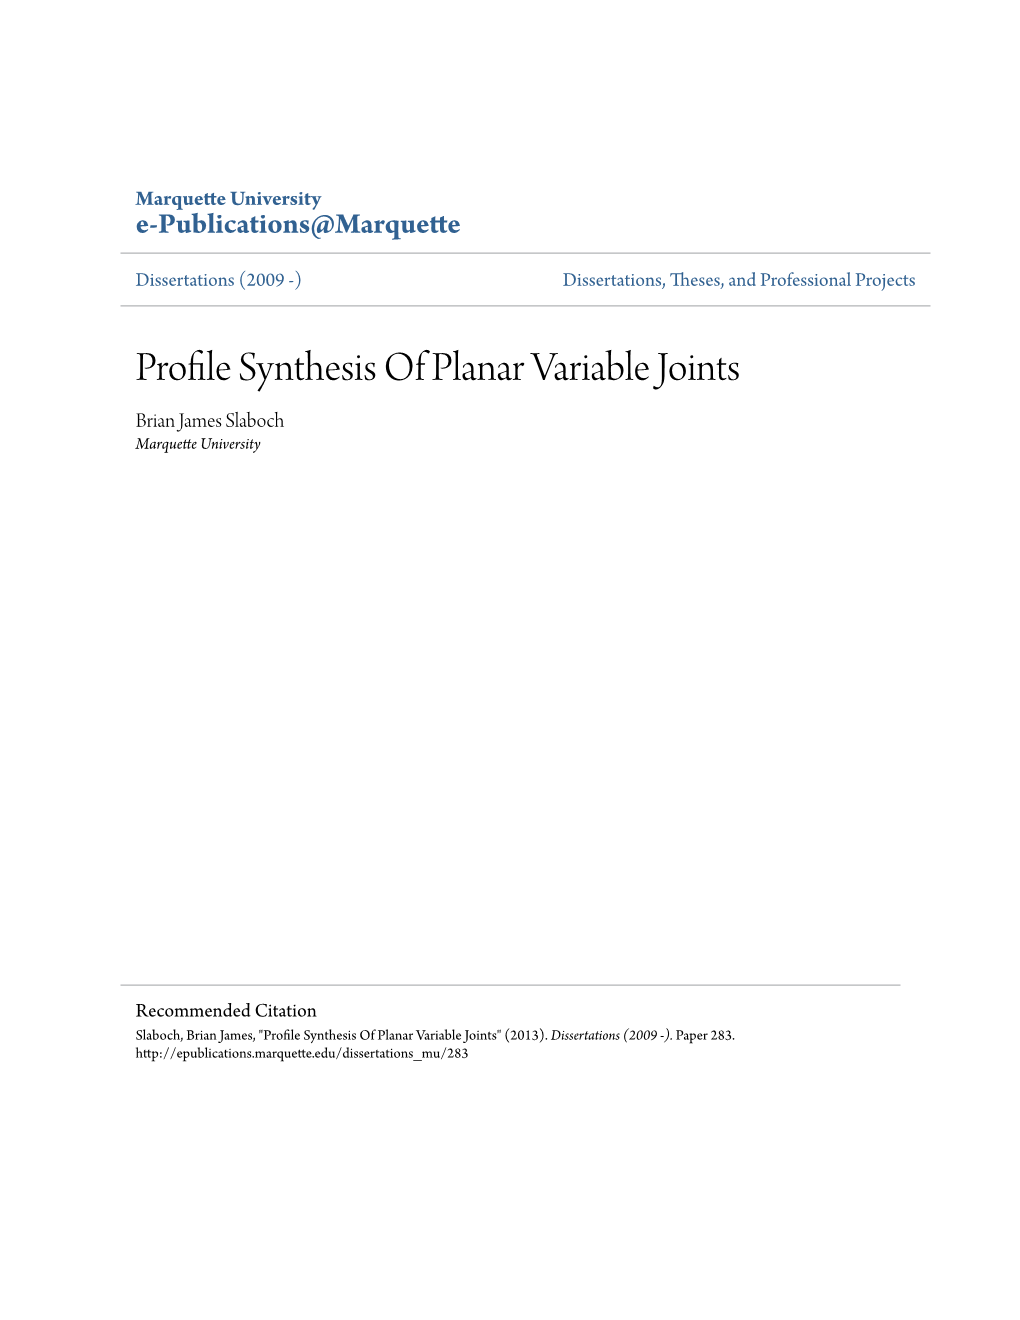 Profile Synthesis of Planar Variable Joints Brian James Slaboch Marquette University